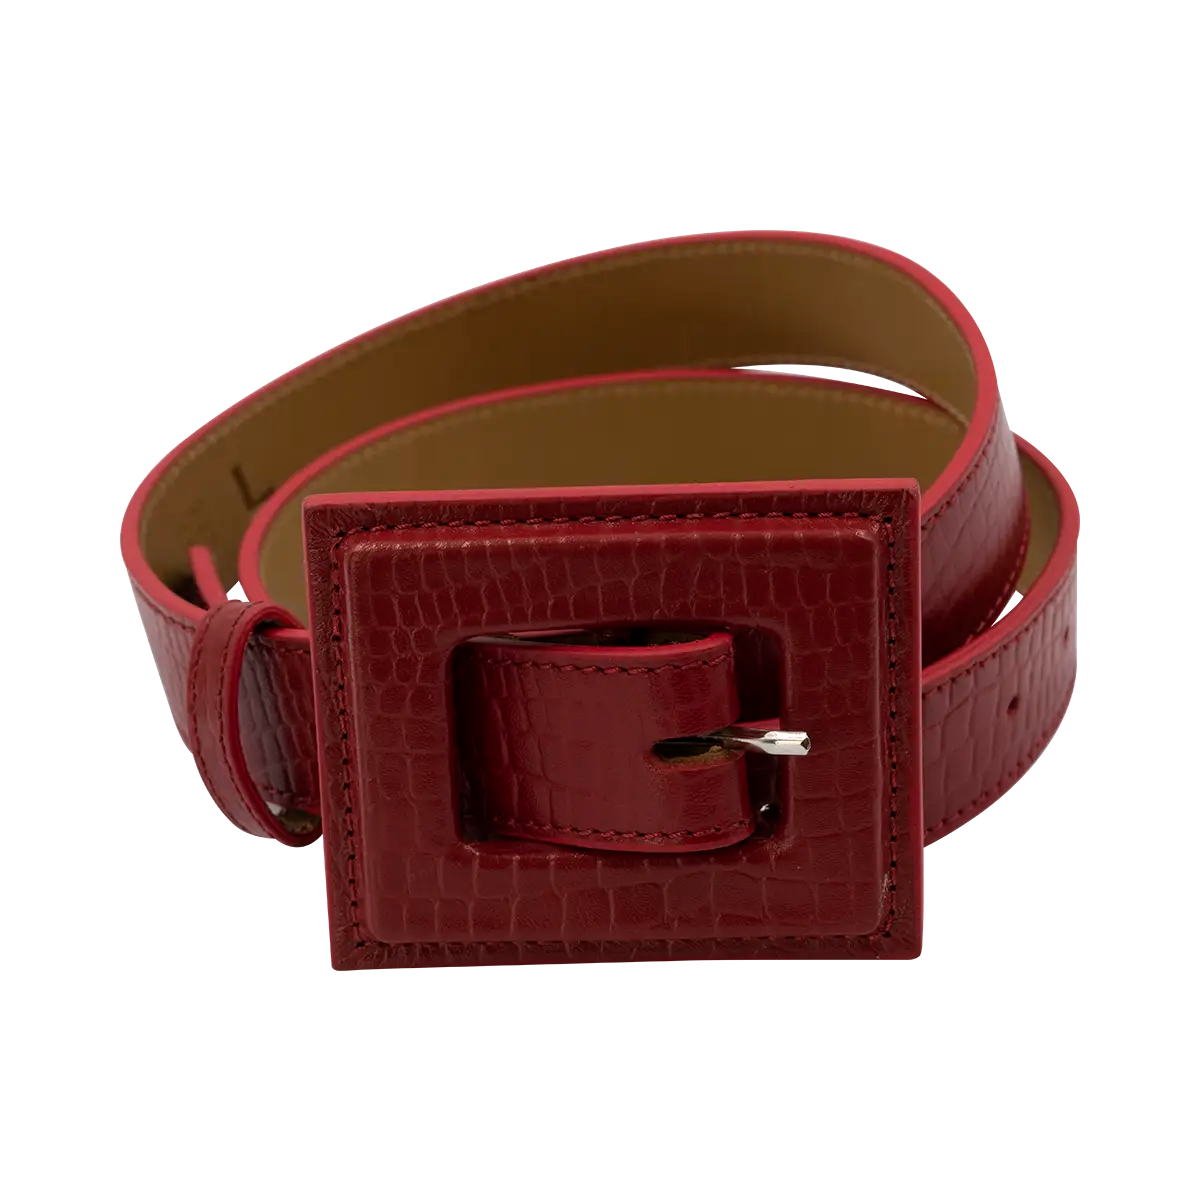 red  leather print belt with a large square buckle. Accessory for women in San Diego, CA.